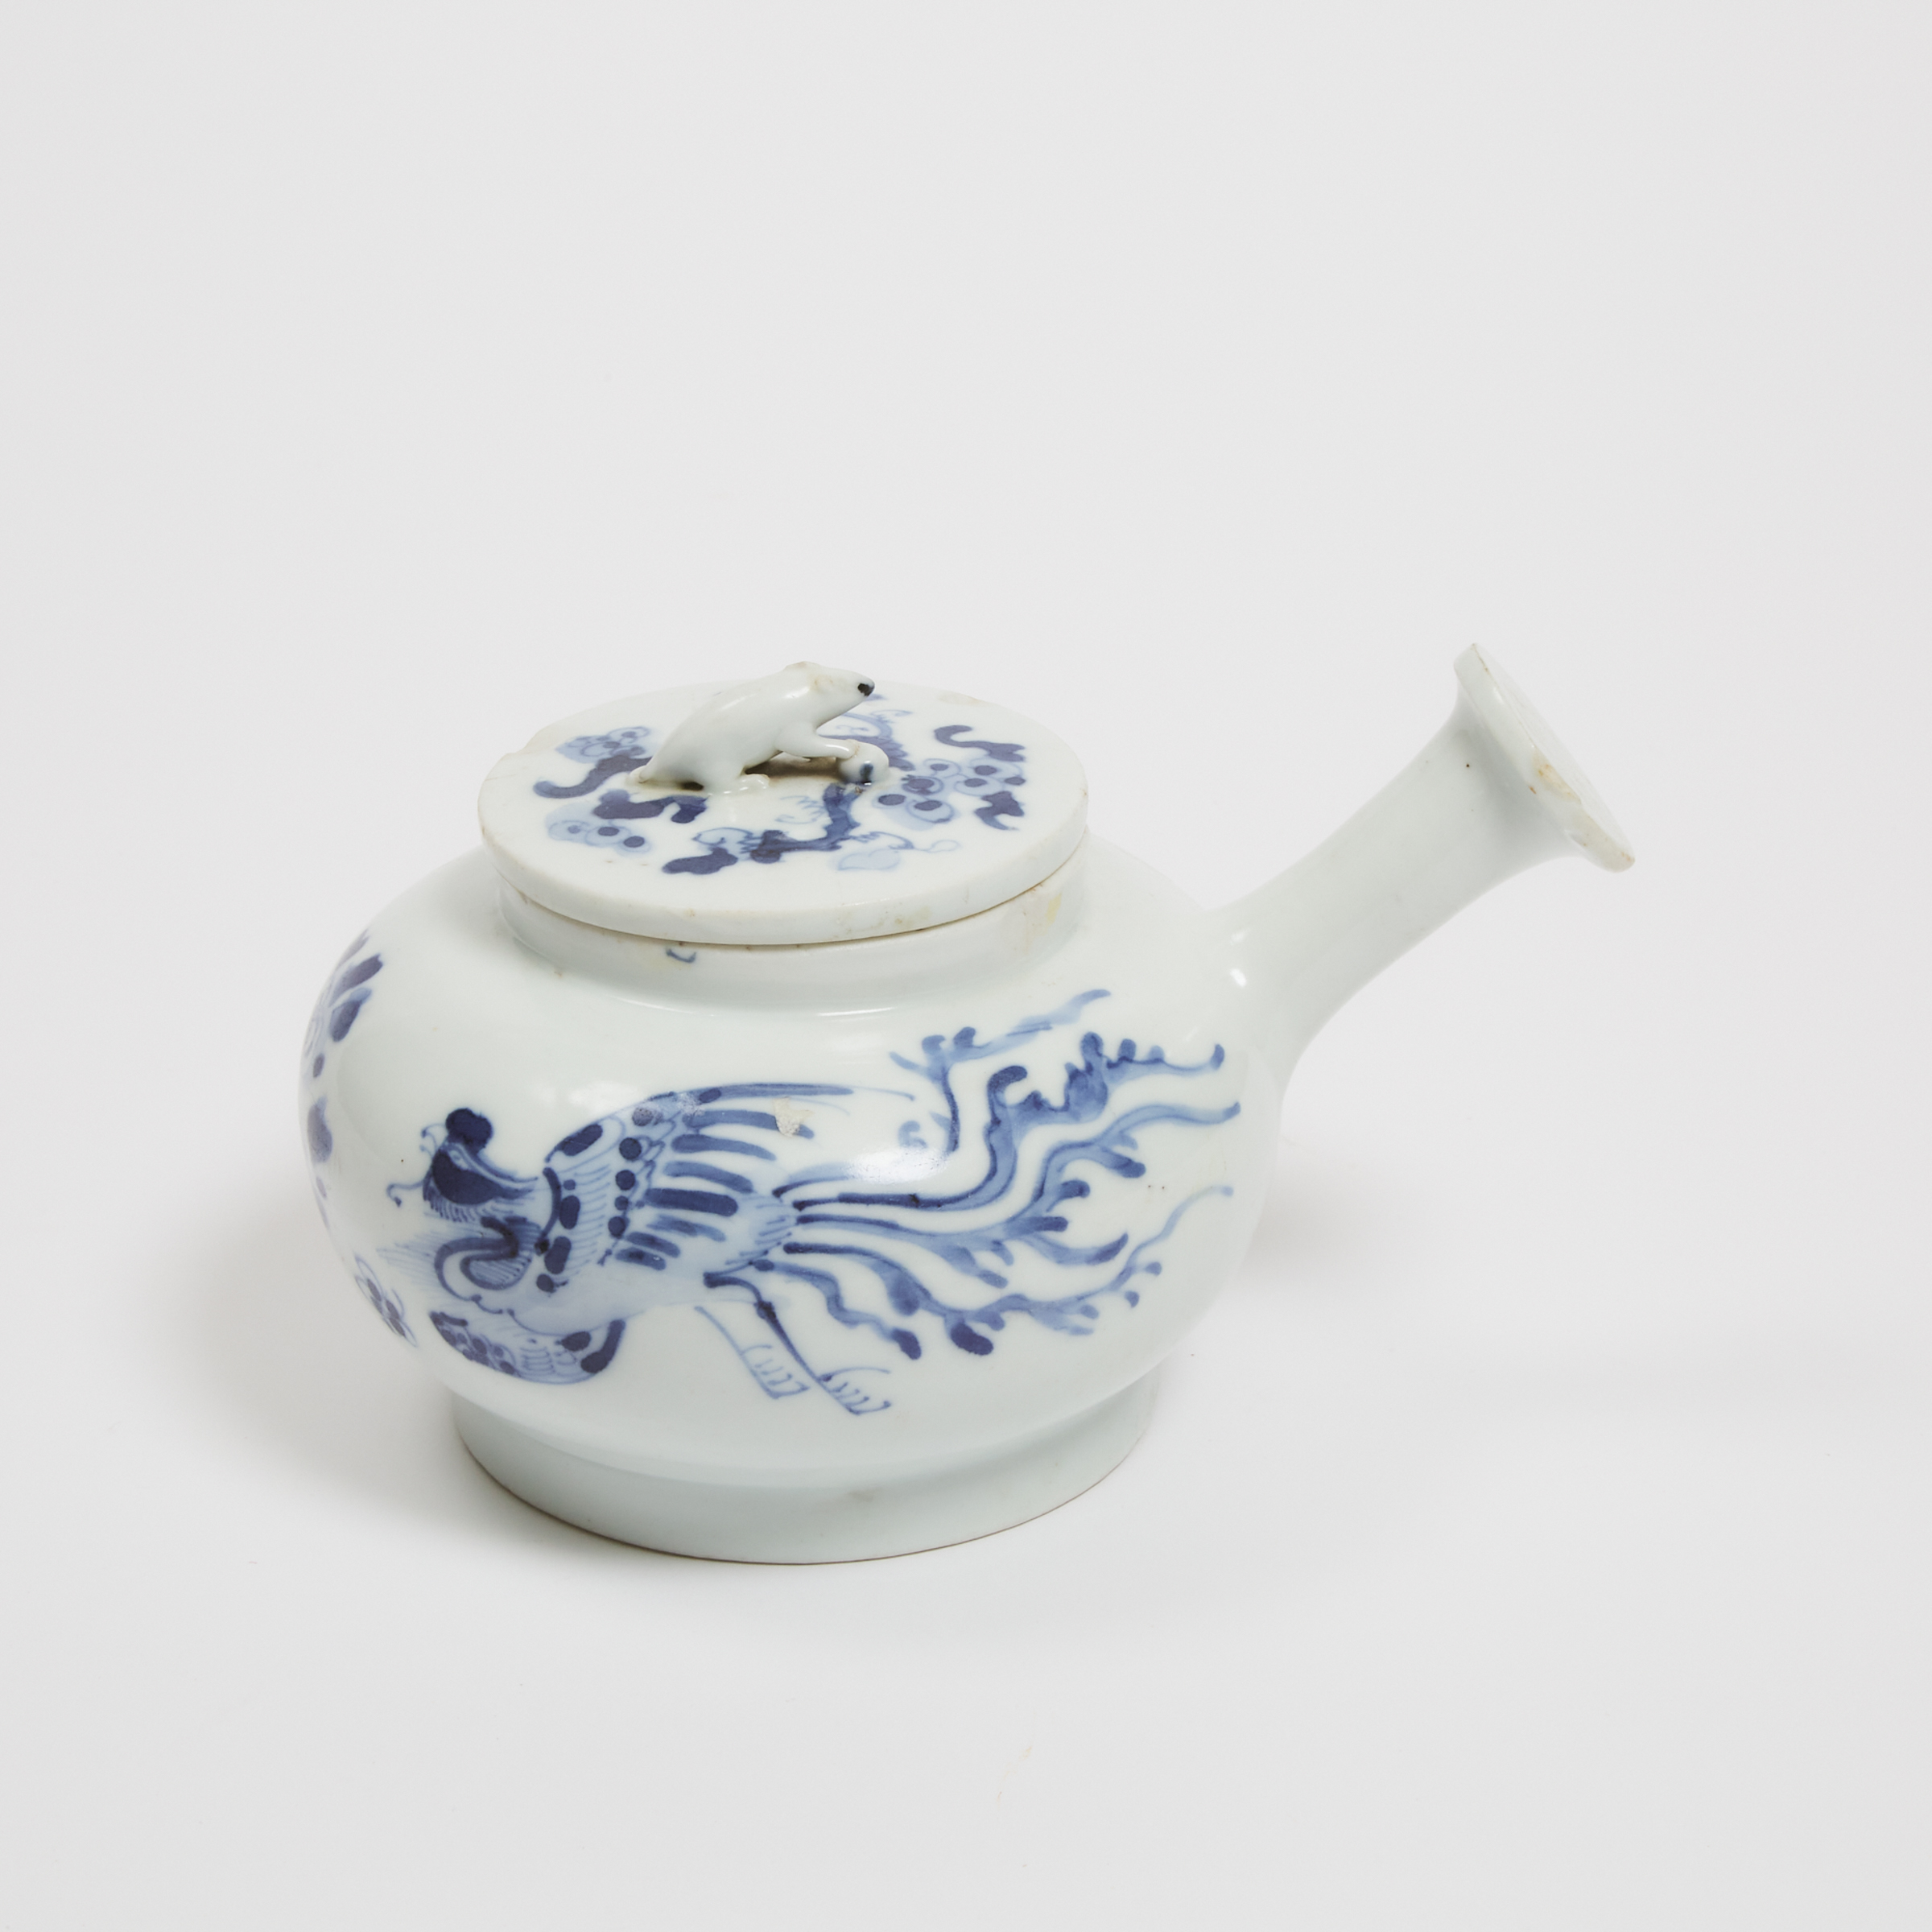 A Blue and White 'Phoenix' Teapot, 18th Century